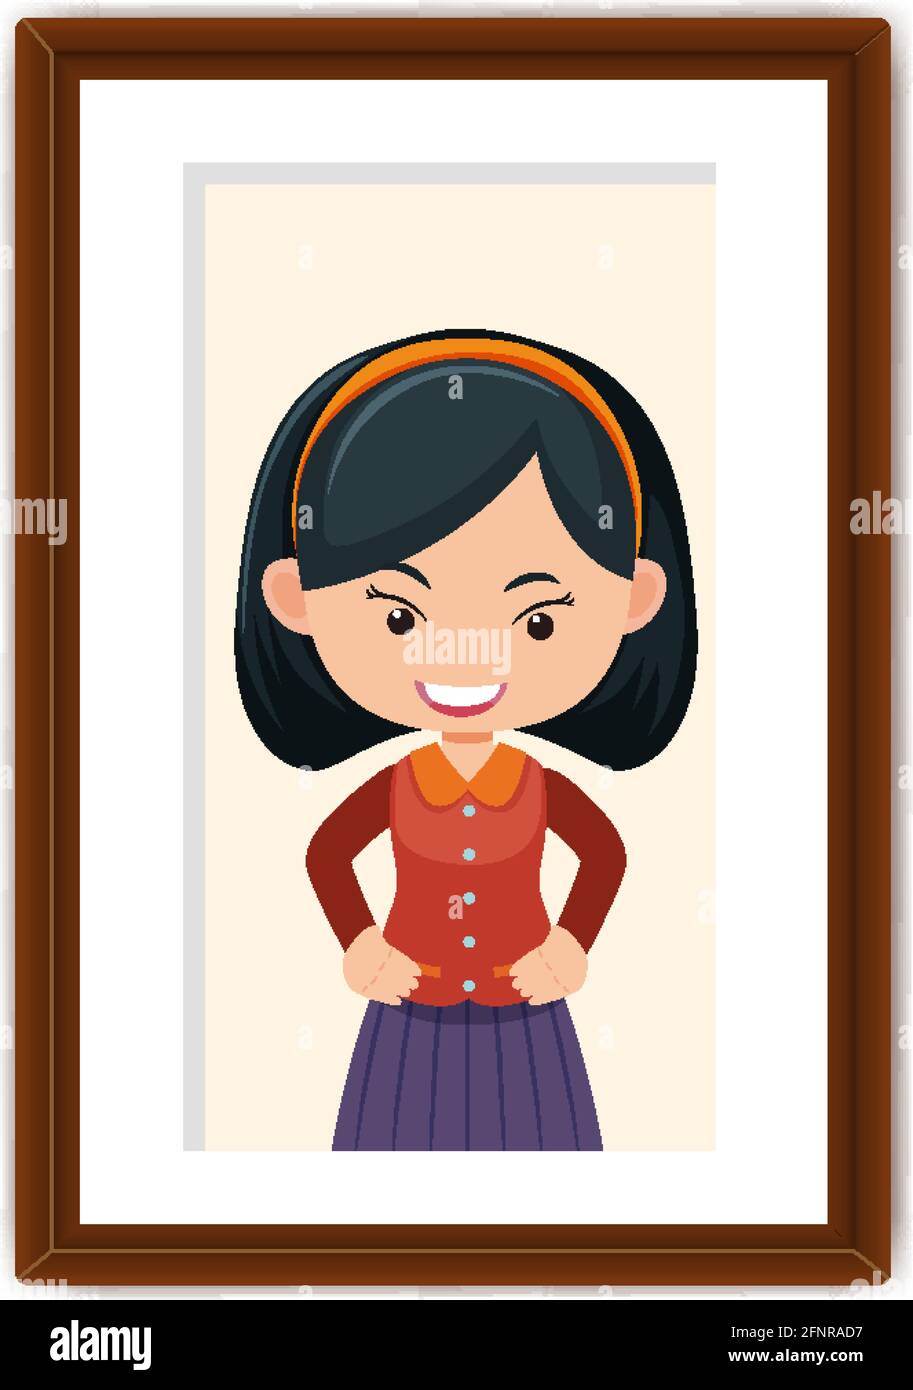 Portrait of a girl in a photo frame illustration Stock Vector Image ...